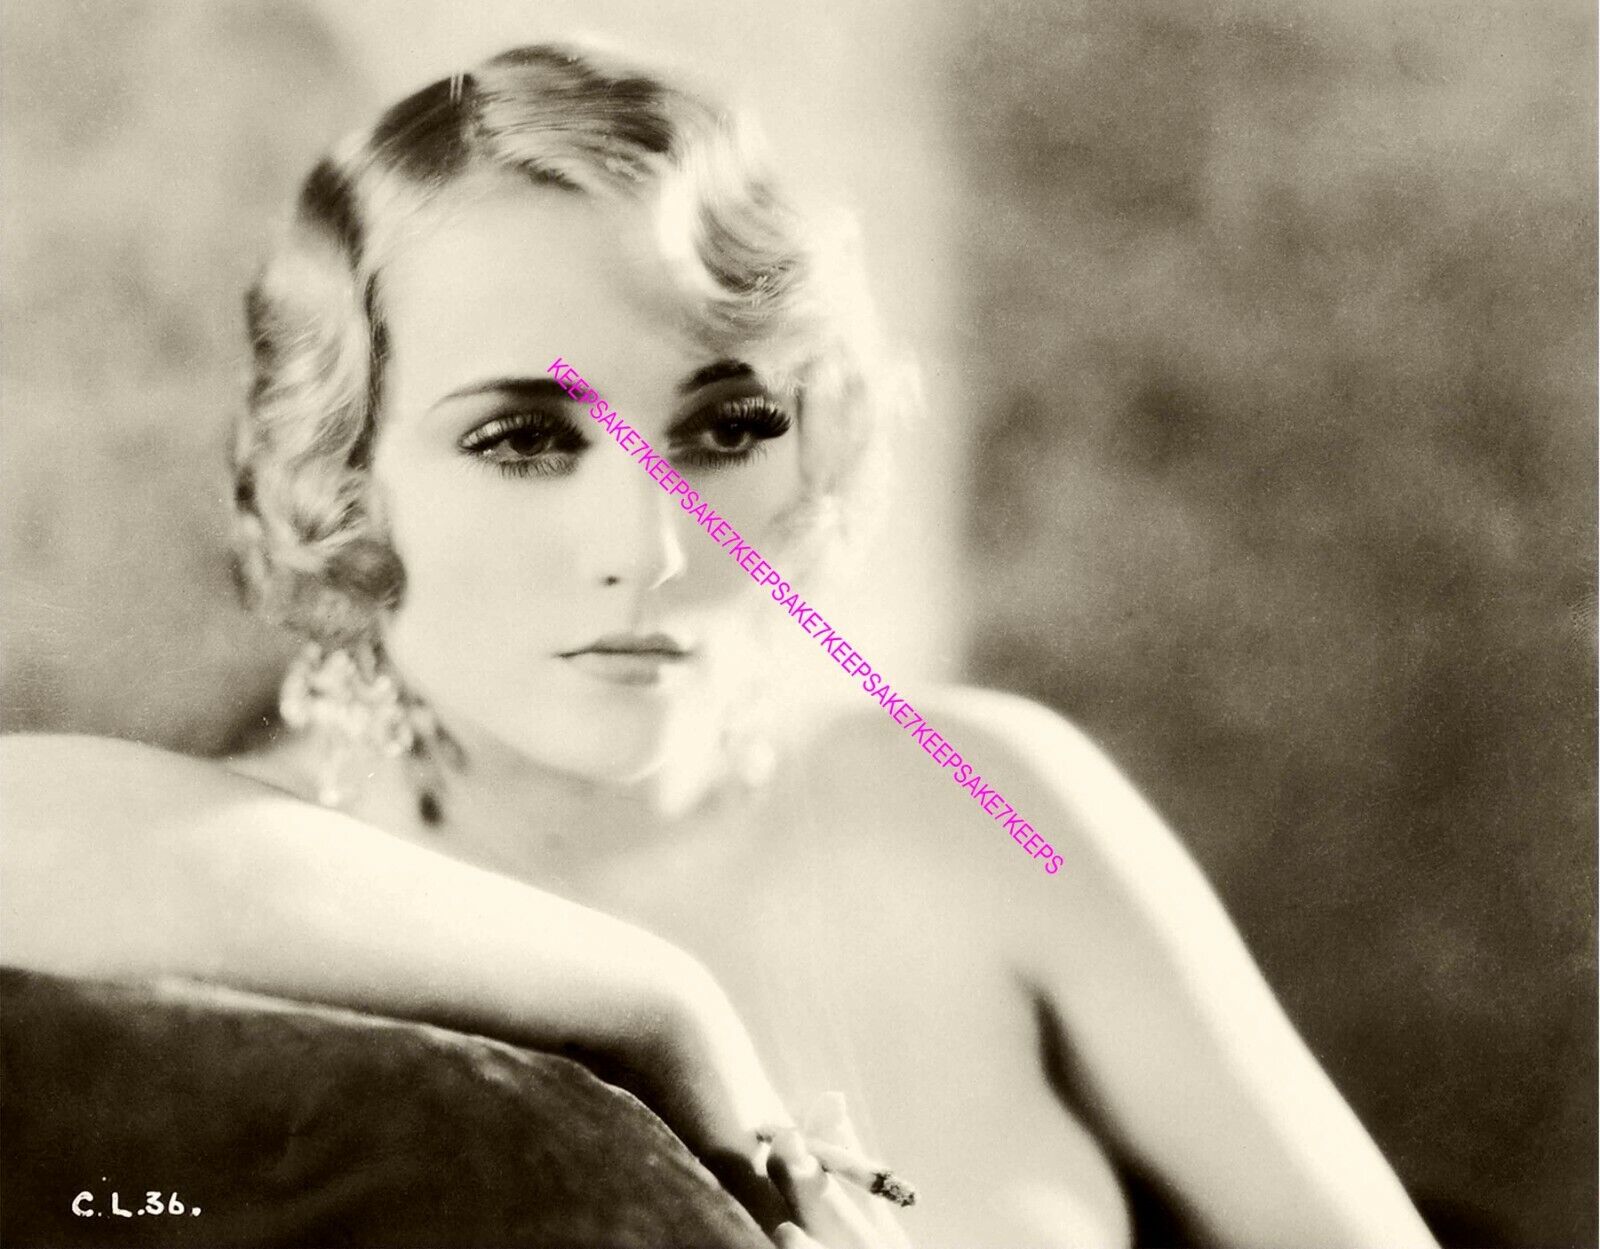 YOUNG CAROLE LOMBARD GORGEOUS EYES STUNNING LOVELY PORTRAIT PHOTO A-CL7